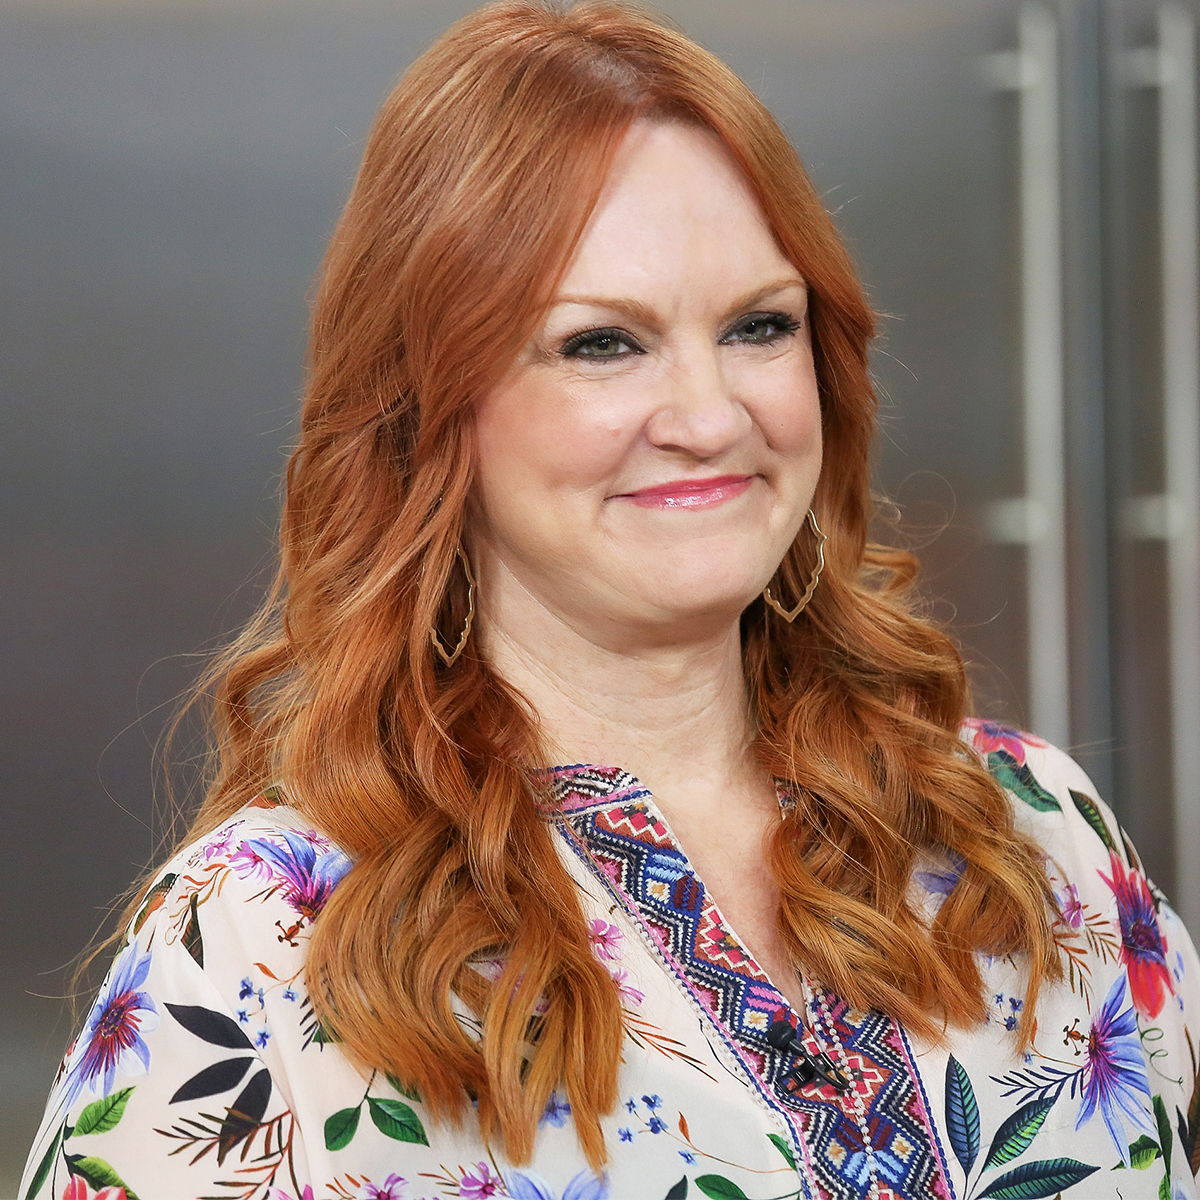 Rs 1200x1200 210315141350 1200 Ree Drummond ?fit=around|1080 1080&output Quality=90&crop=1080 1080;center,top